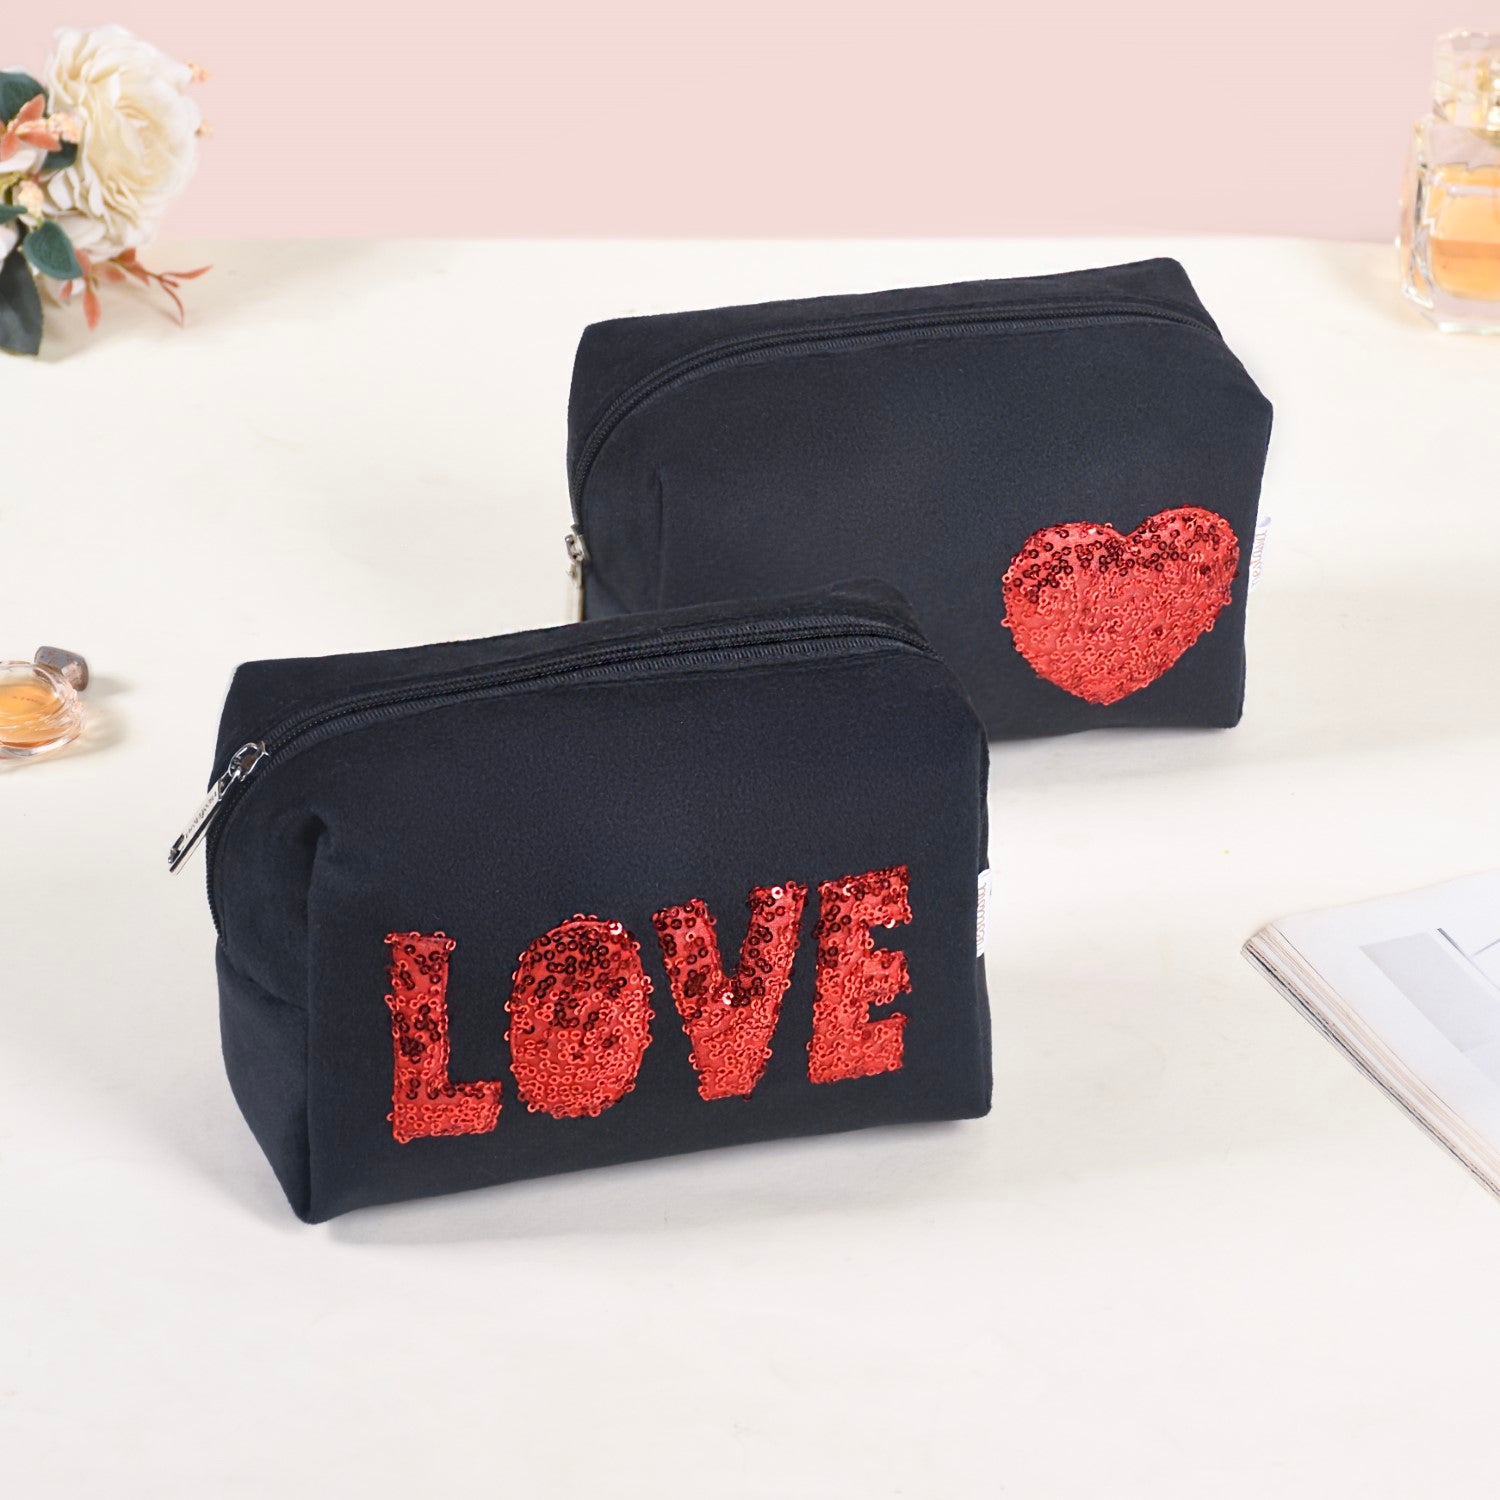 Buy Makeup Bag Travel Cosmetic Bags Small for Women Girls Zipper Pouch  Makeup Organizer Waterproof Cute (Cow) Online at Low Prices in India -  Amazon.in